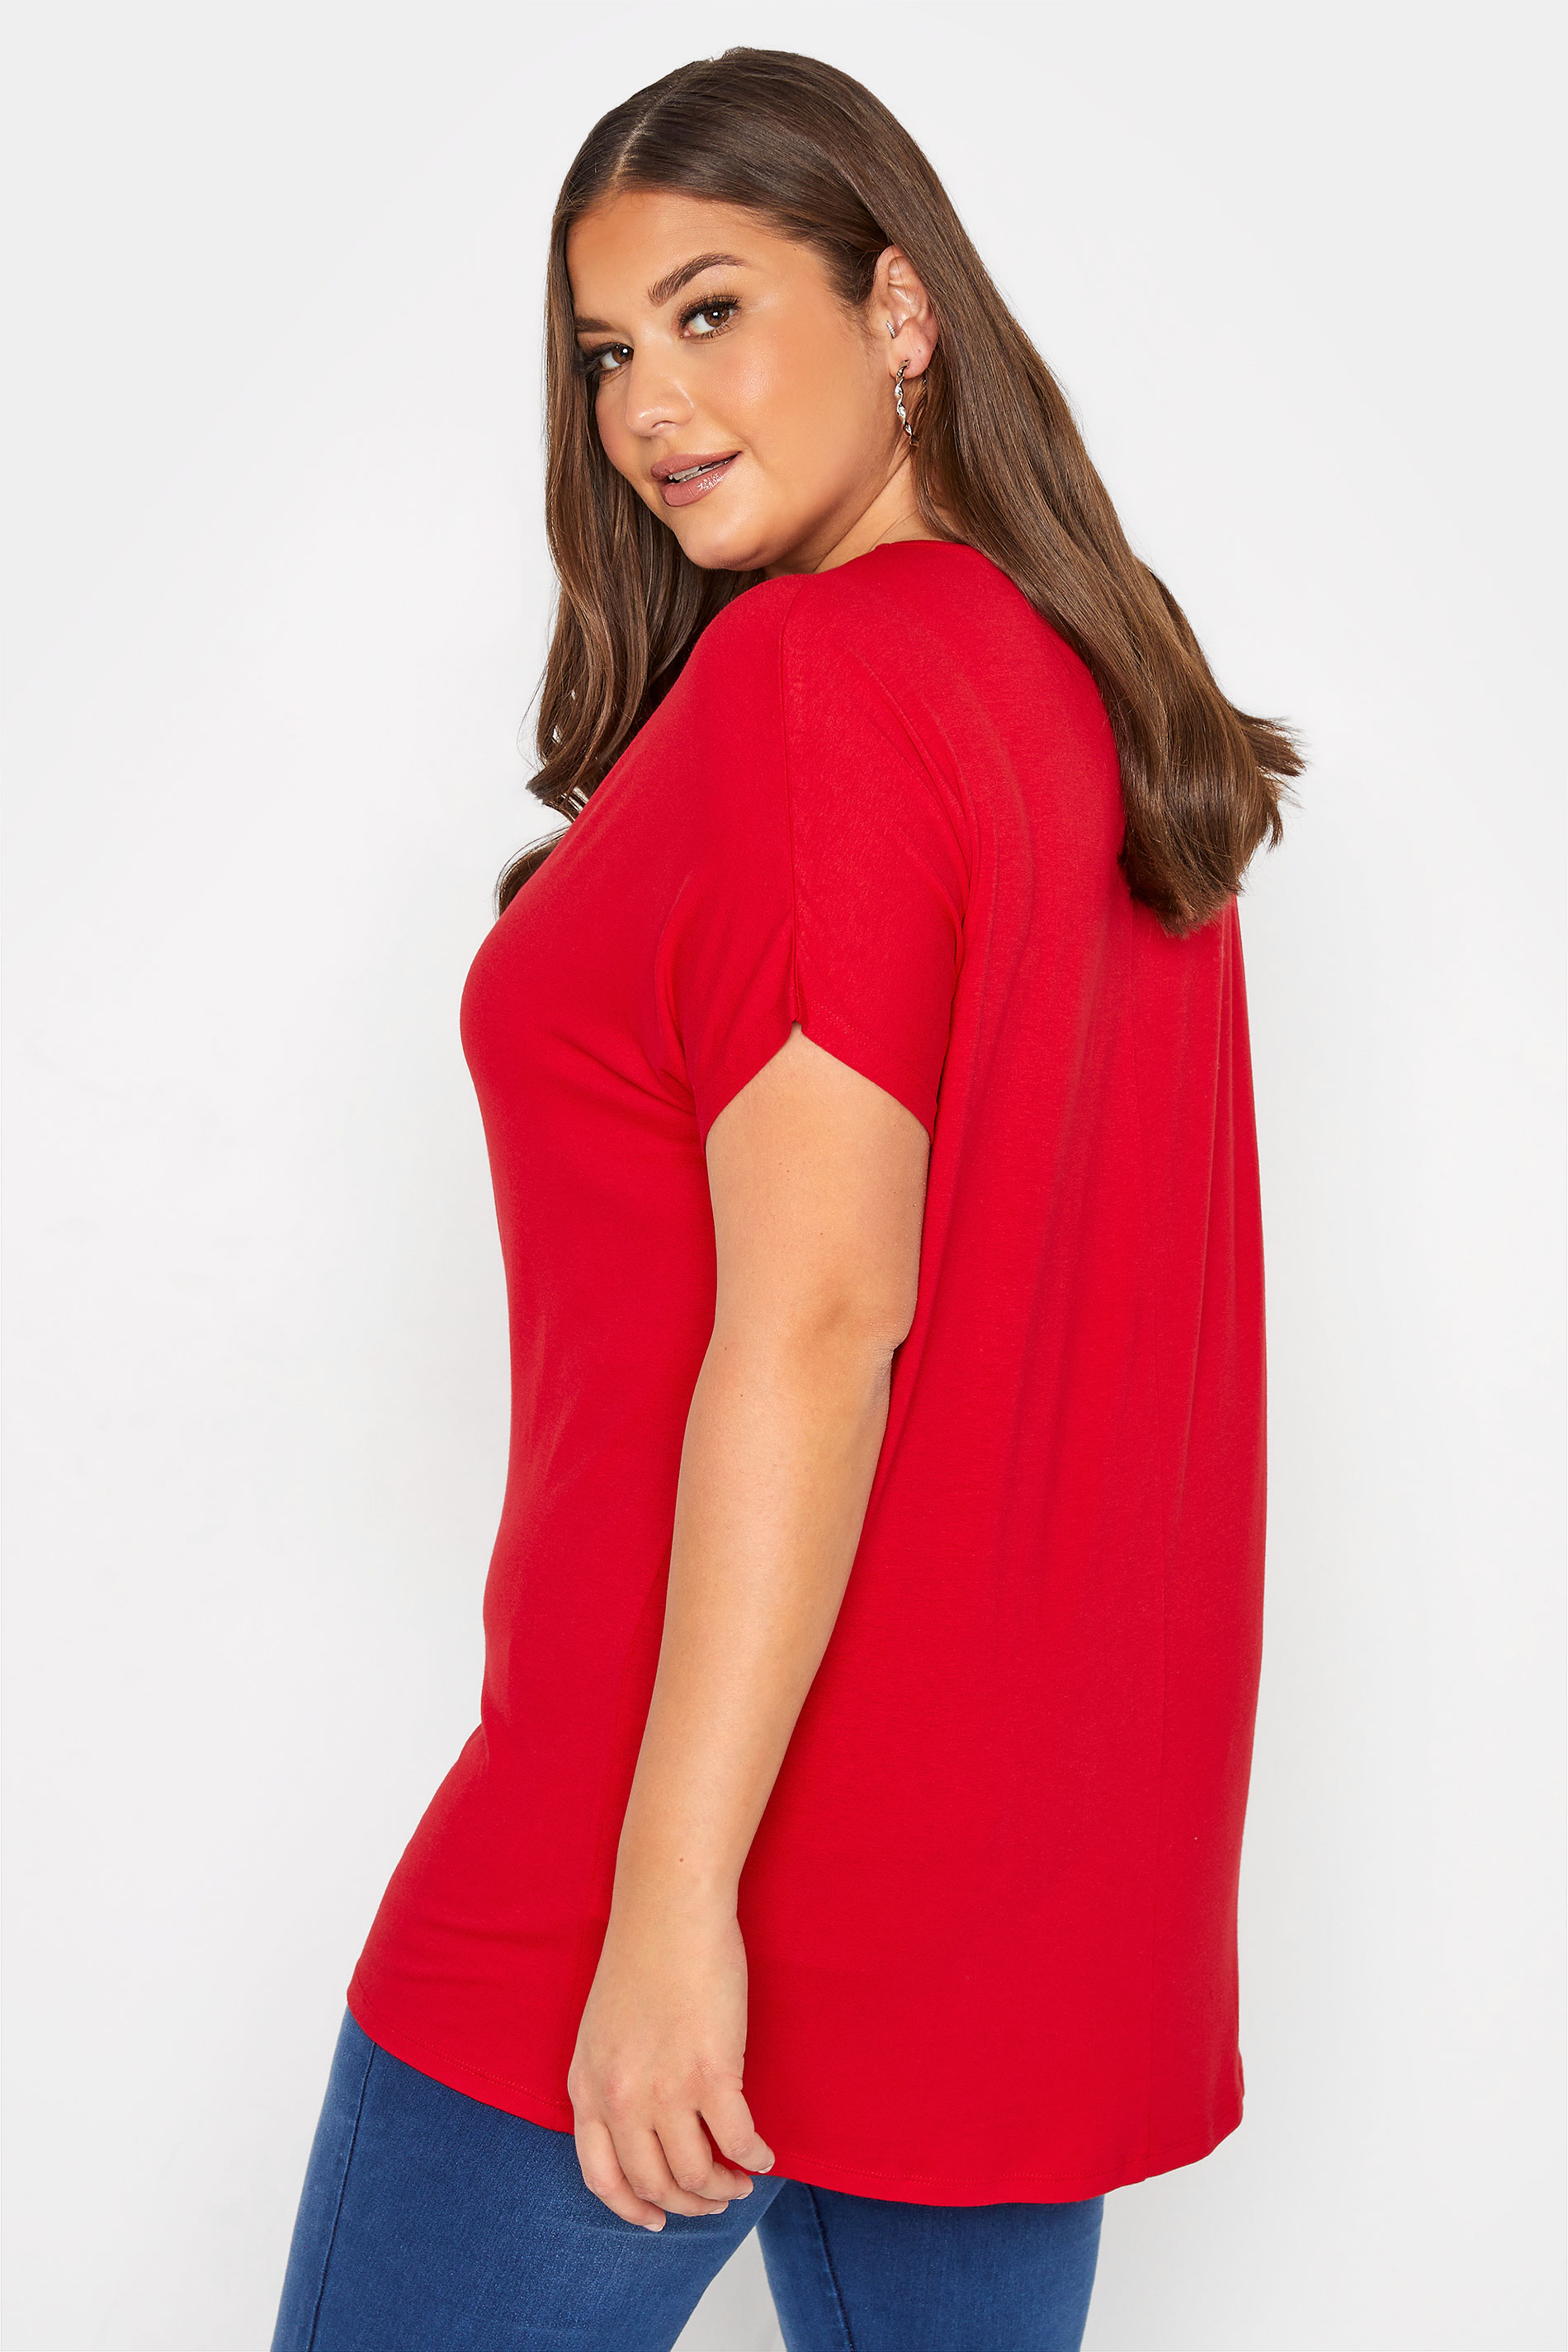 Grande taille  Tops Grande taille  T-Shirts | T-Shirt Rouge Manches Courtes Jersey - CU48771